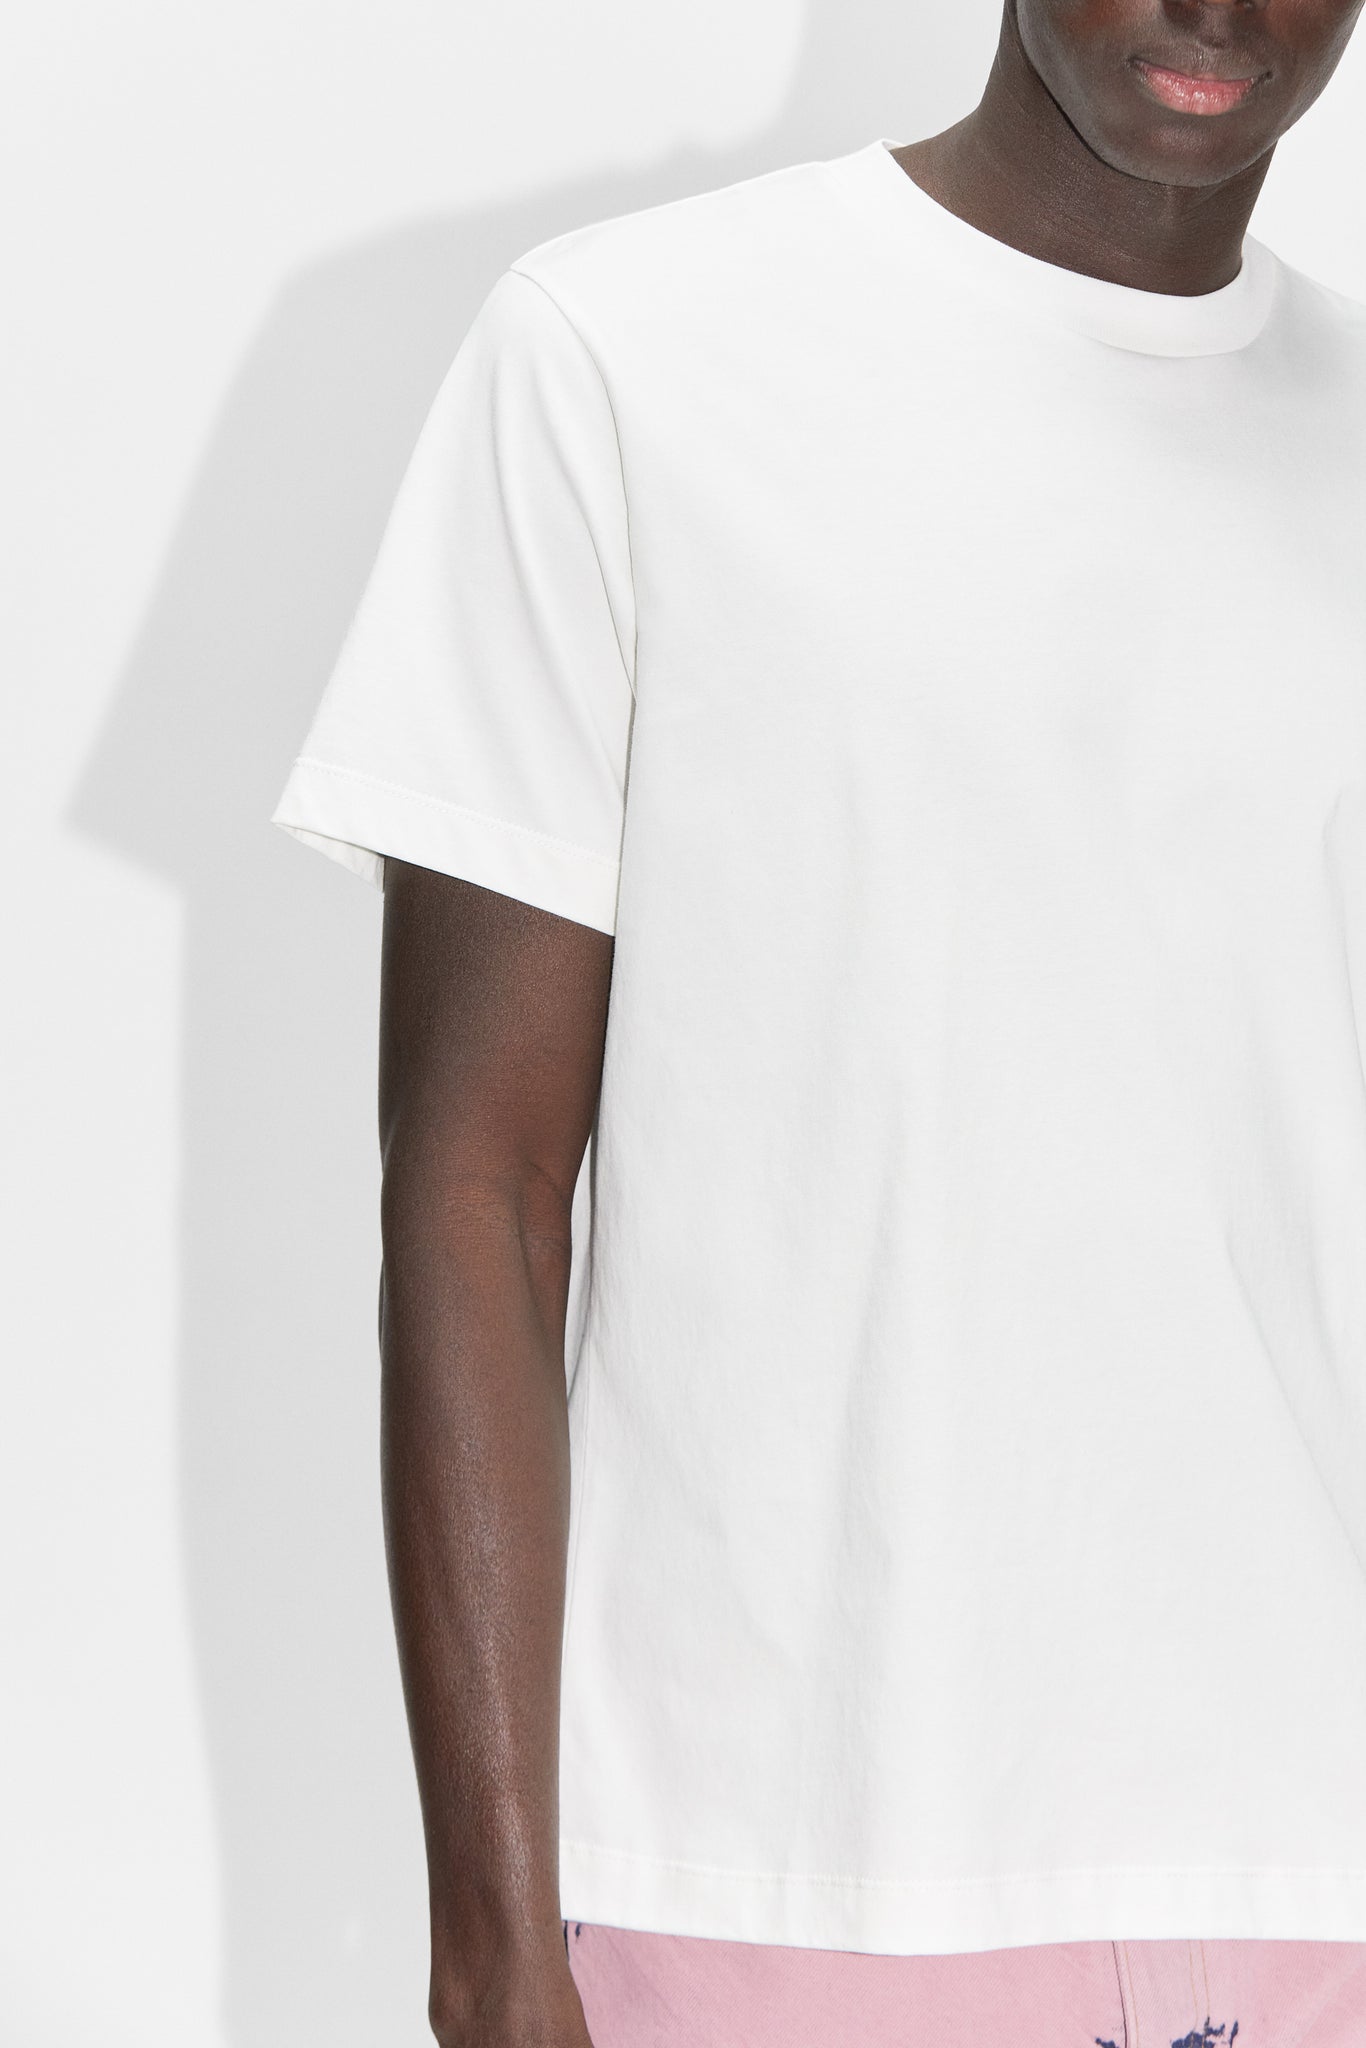 HOPE White – Neck Relaxed STHLM & Off T-shirt Black in Faded Crew